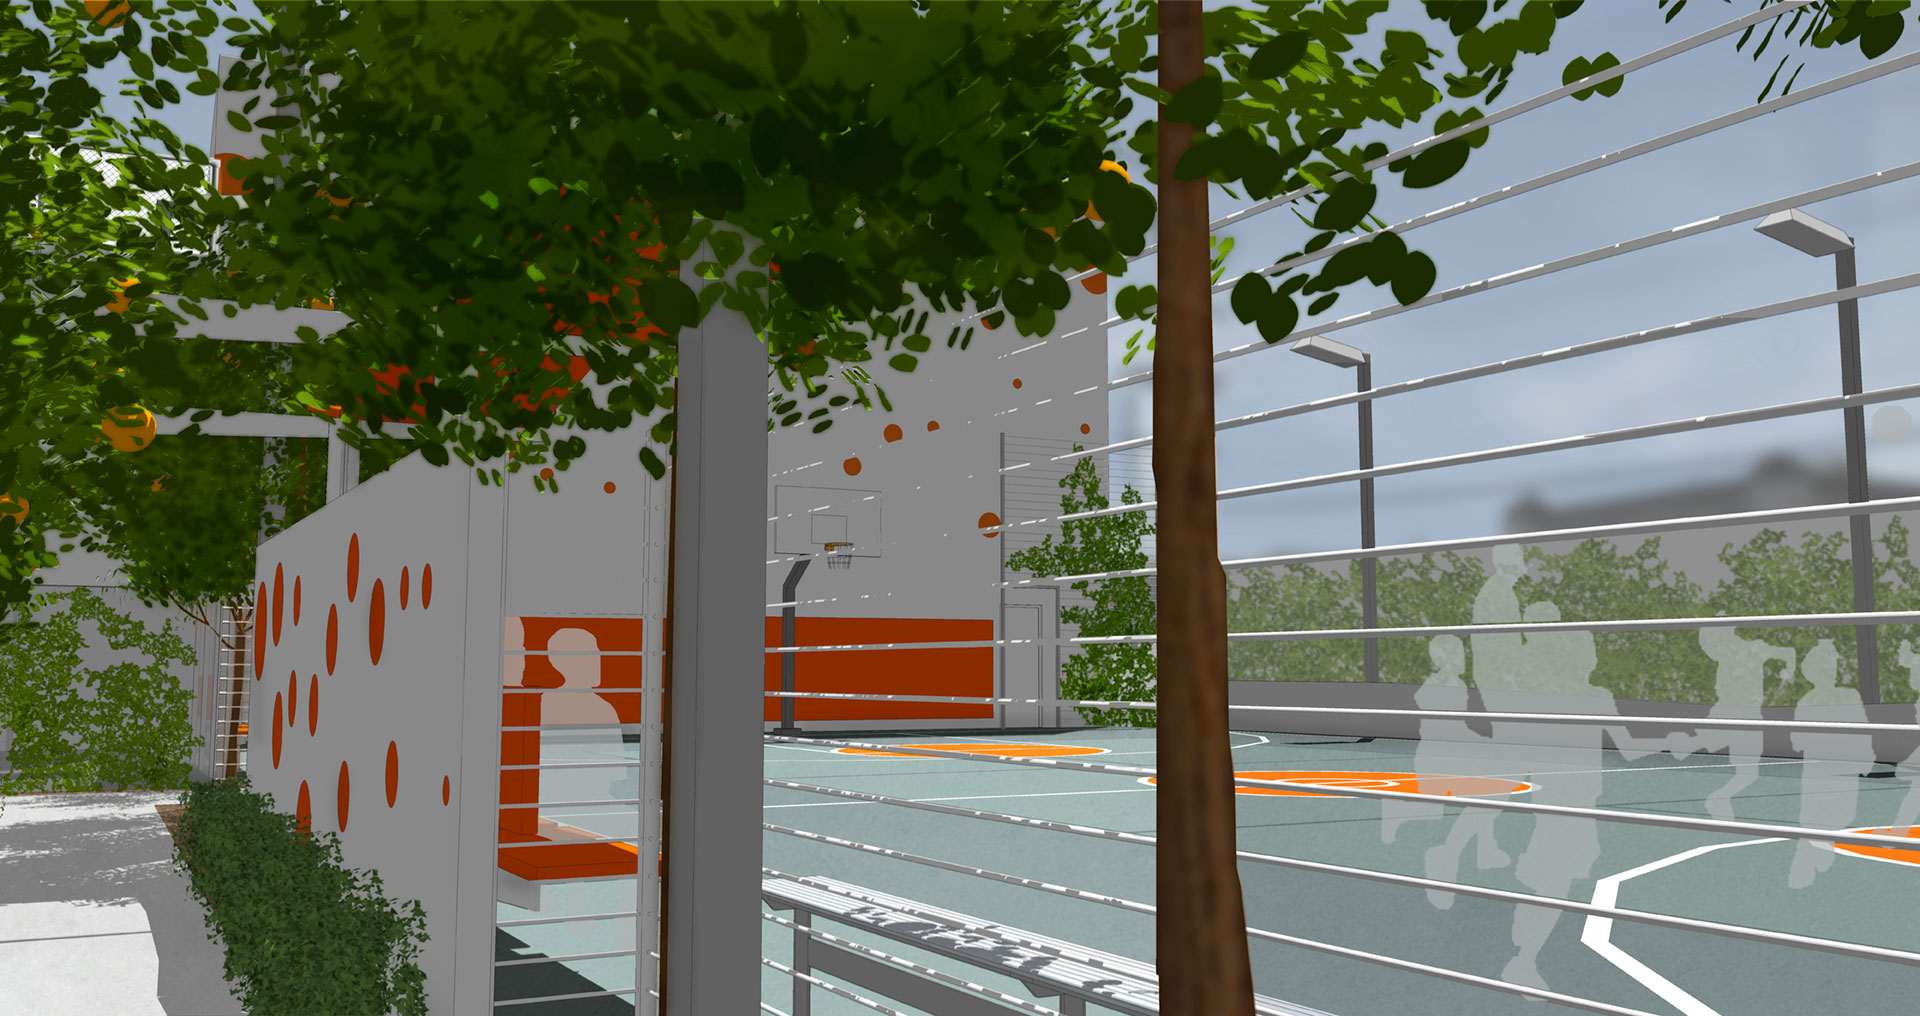 A rendering looking through the fence from the entry to the sports court.